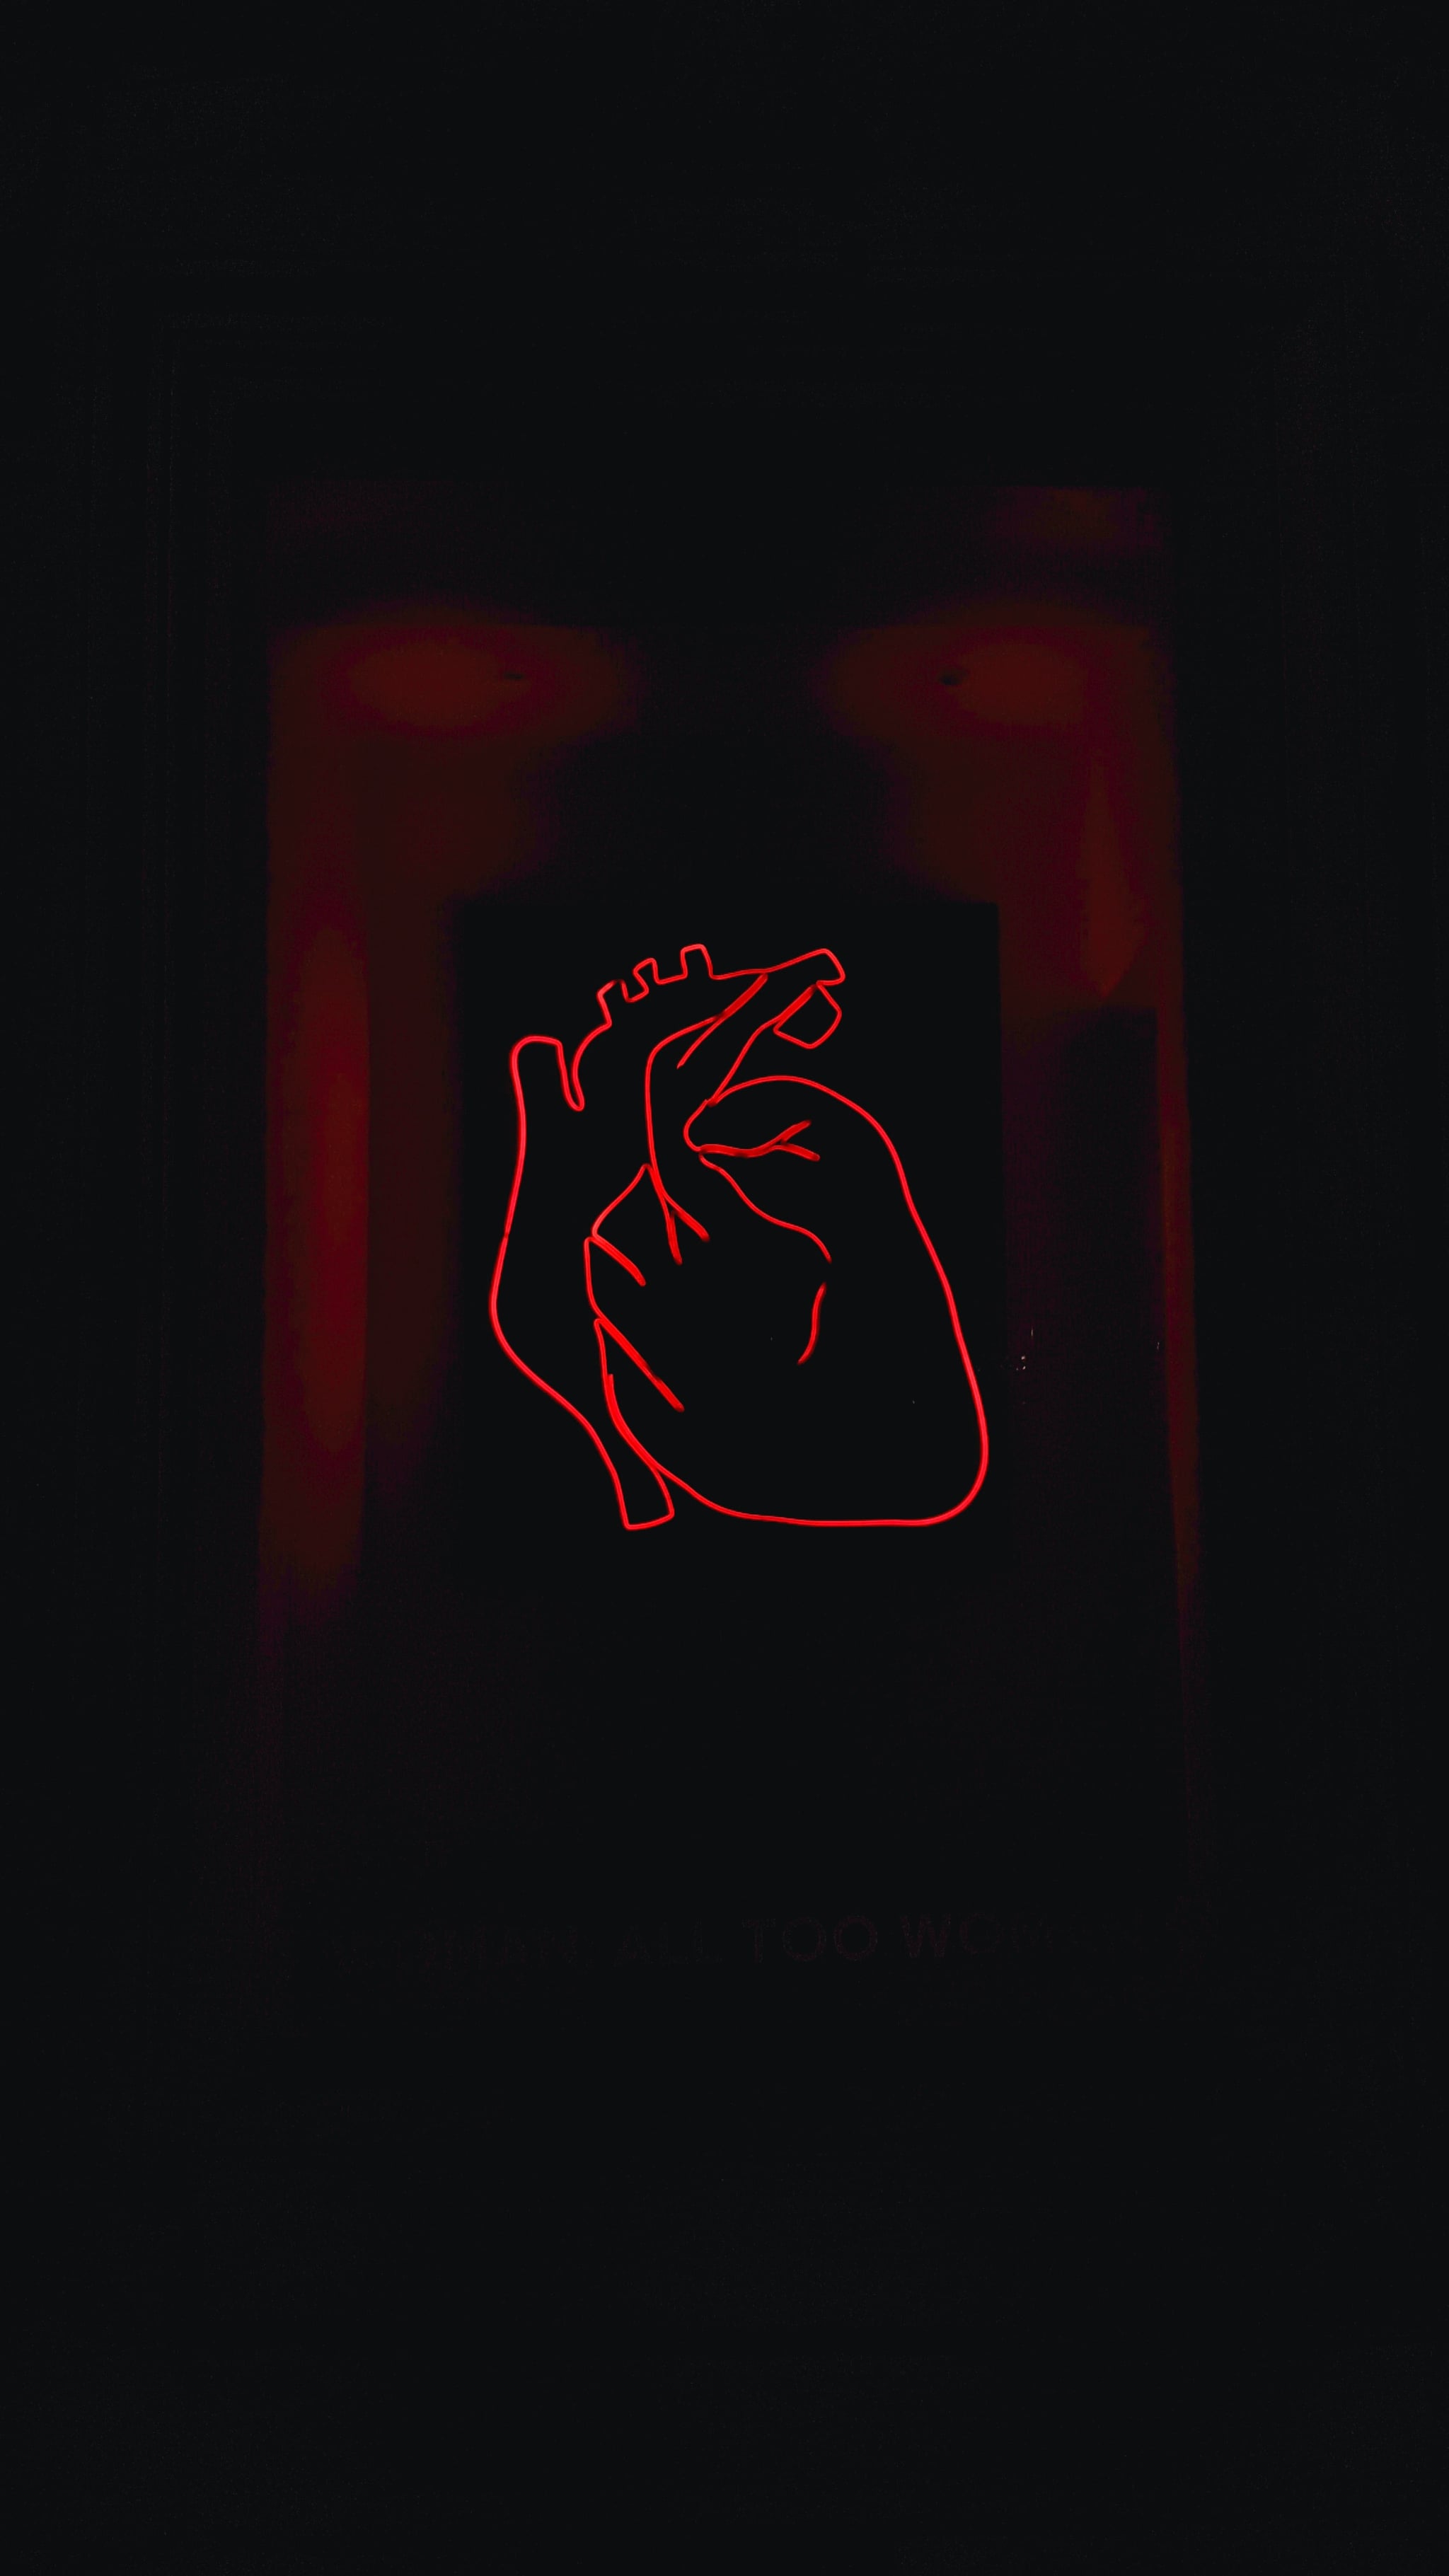 A red heart shaped light in the dark - Black, heart, dark phone, black phone, black heart